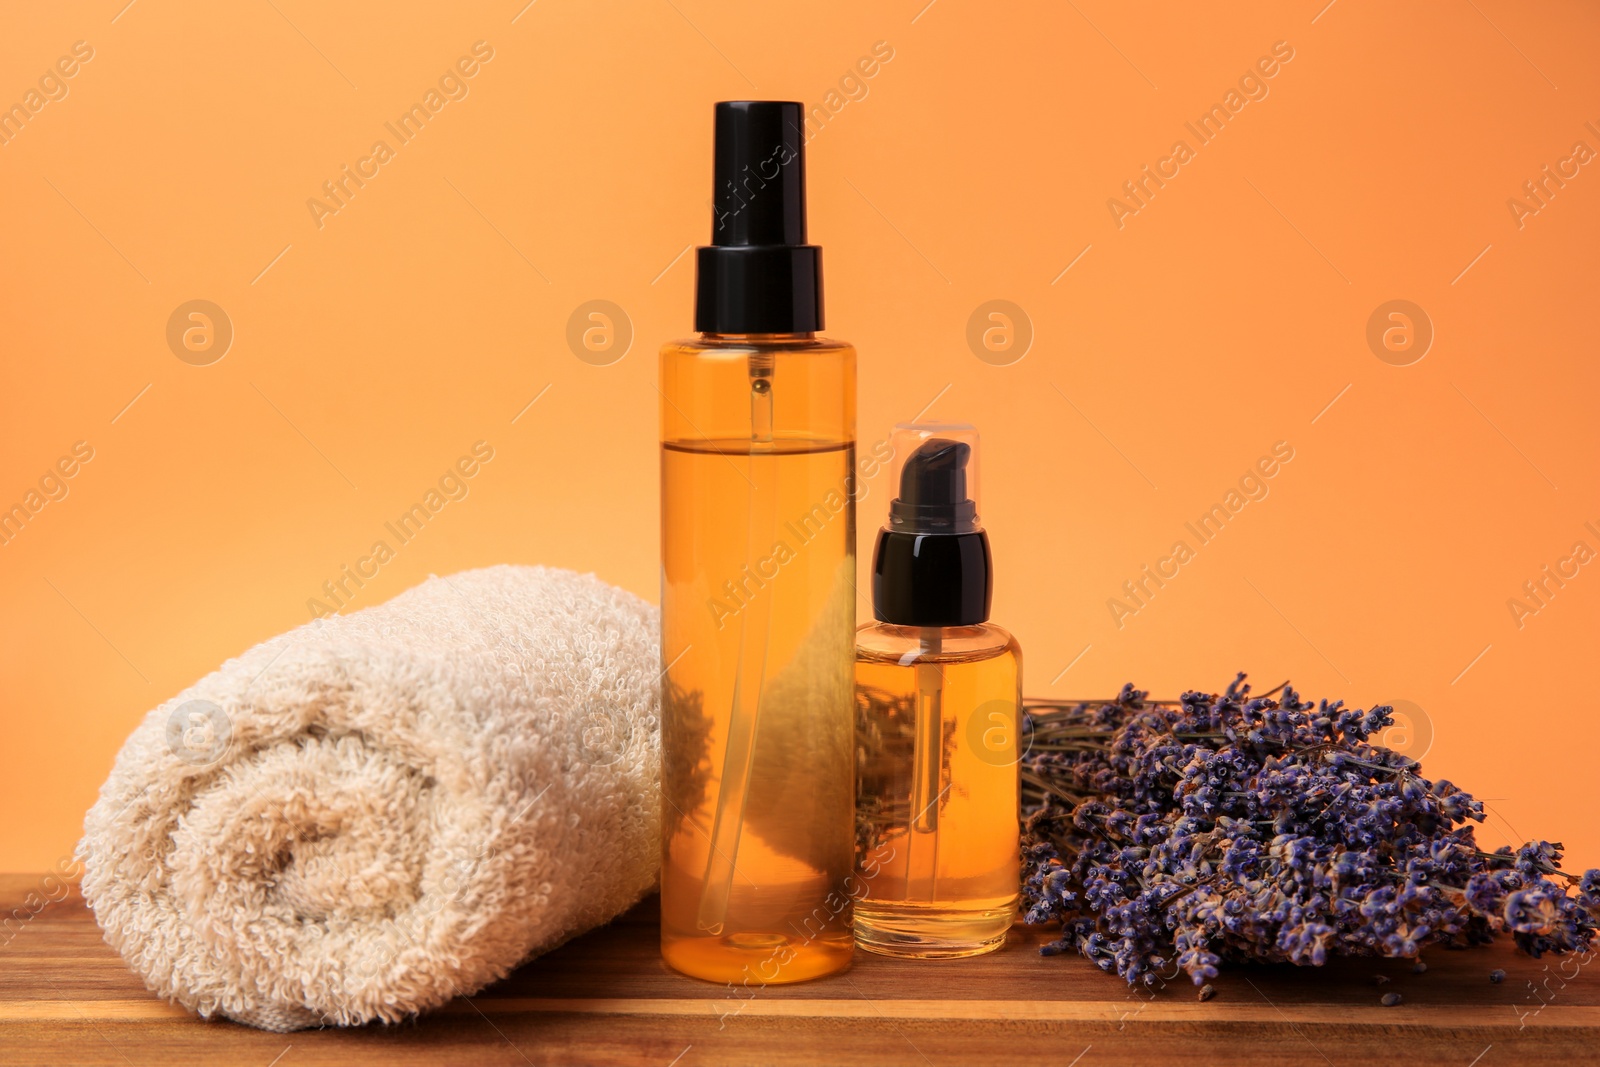 Photo of Bottles of cosmetic products, rolled towel and dry lavender flowers on orange background